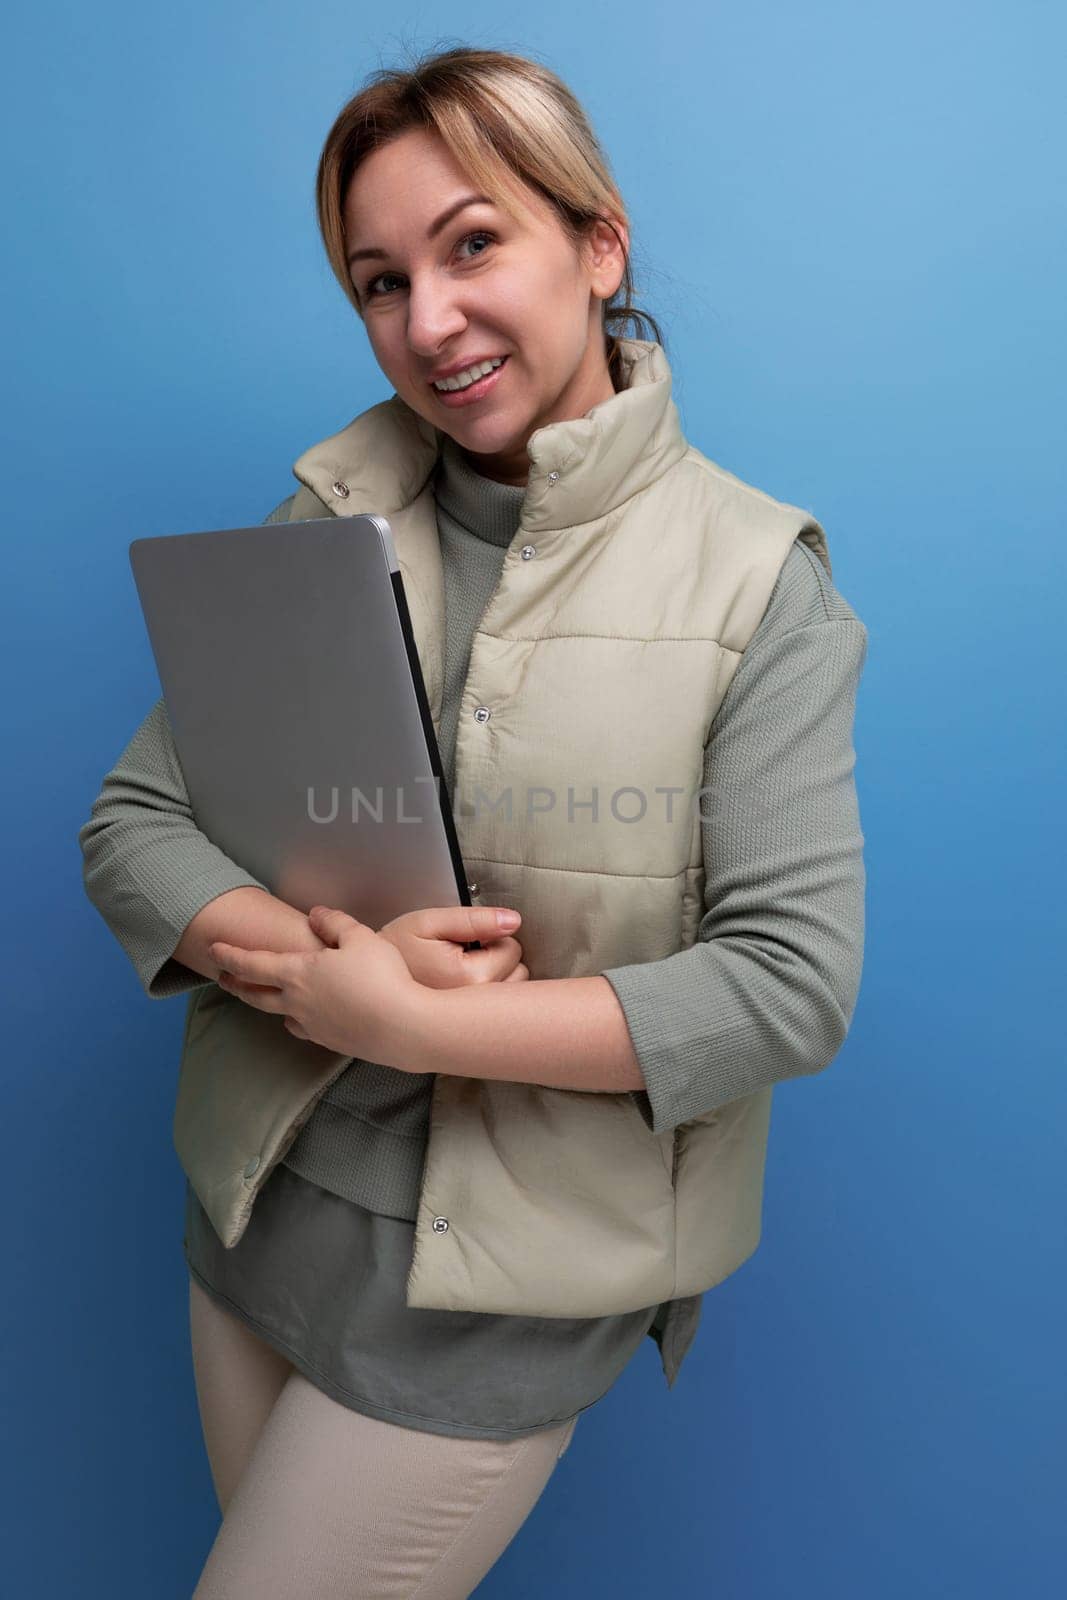 young blondie business woman with a laptop in her hands on a blue background.